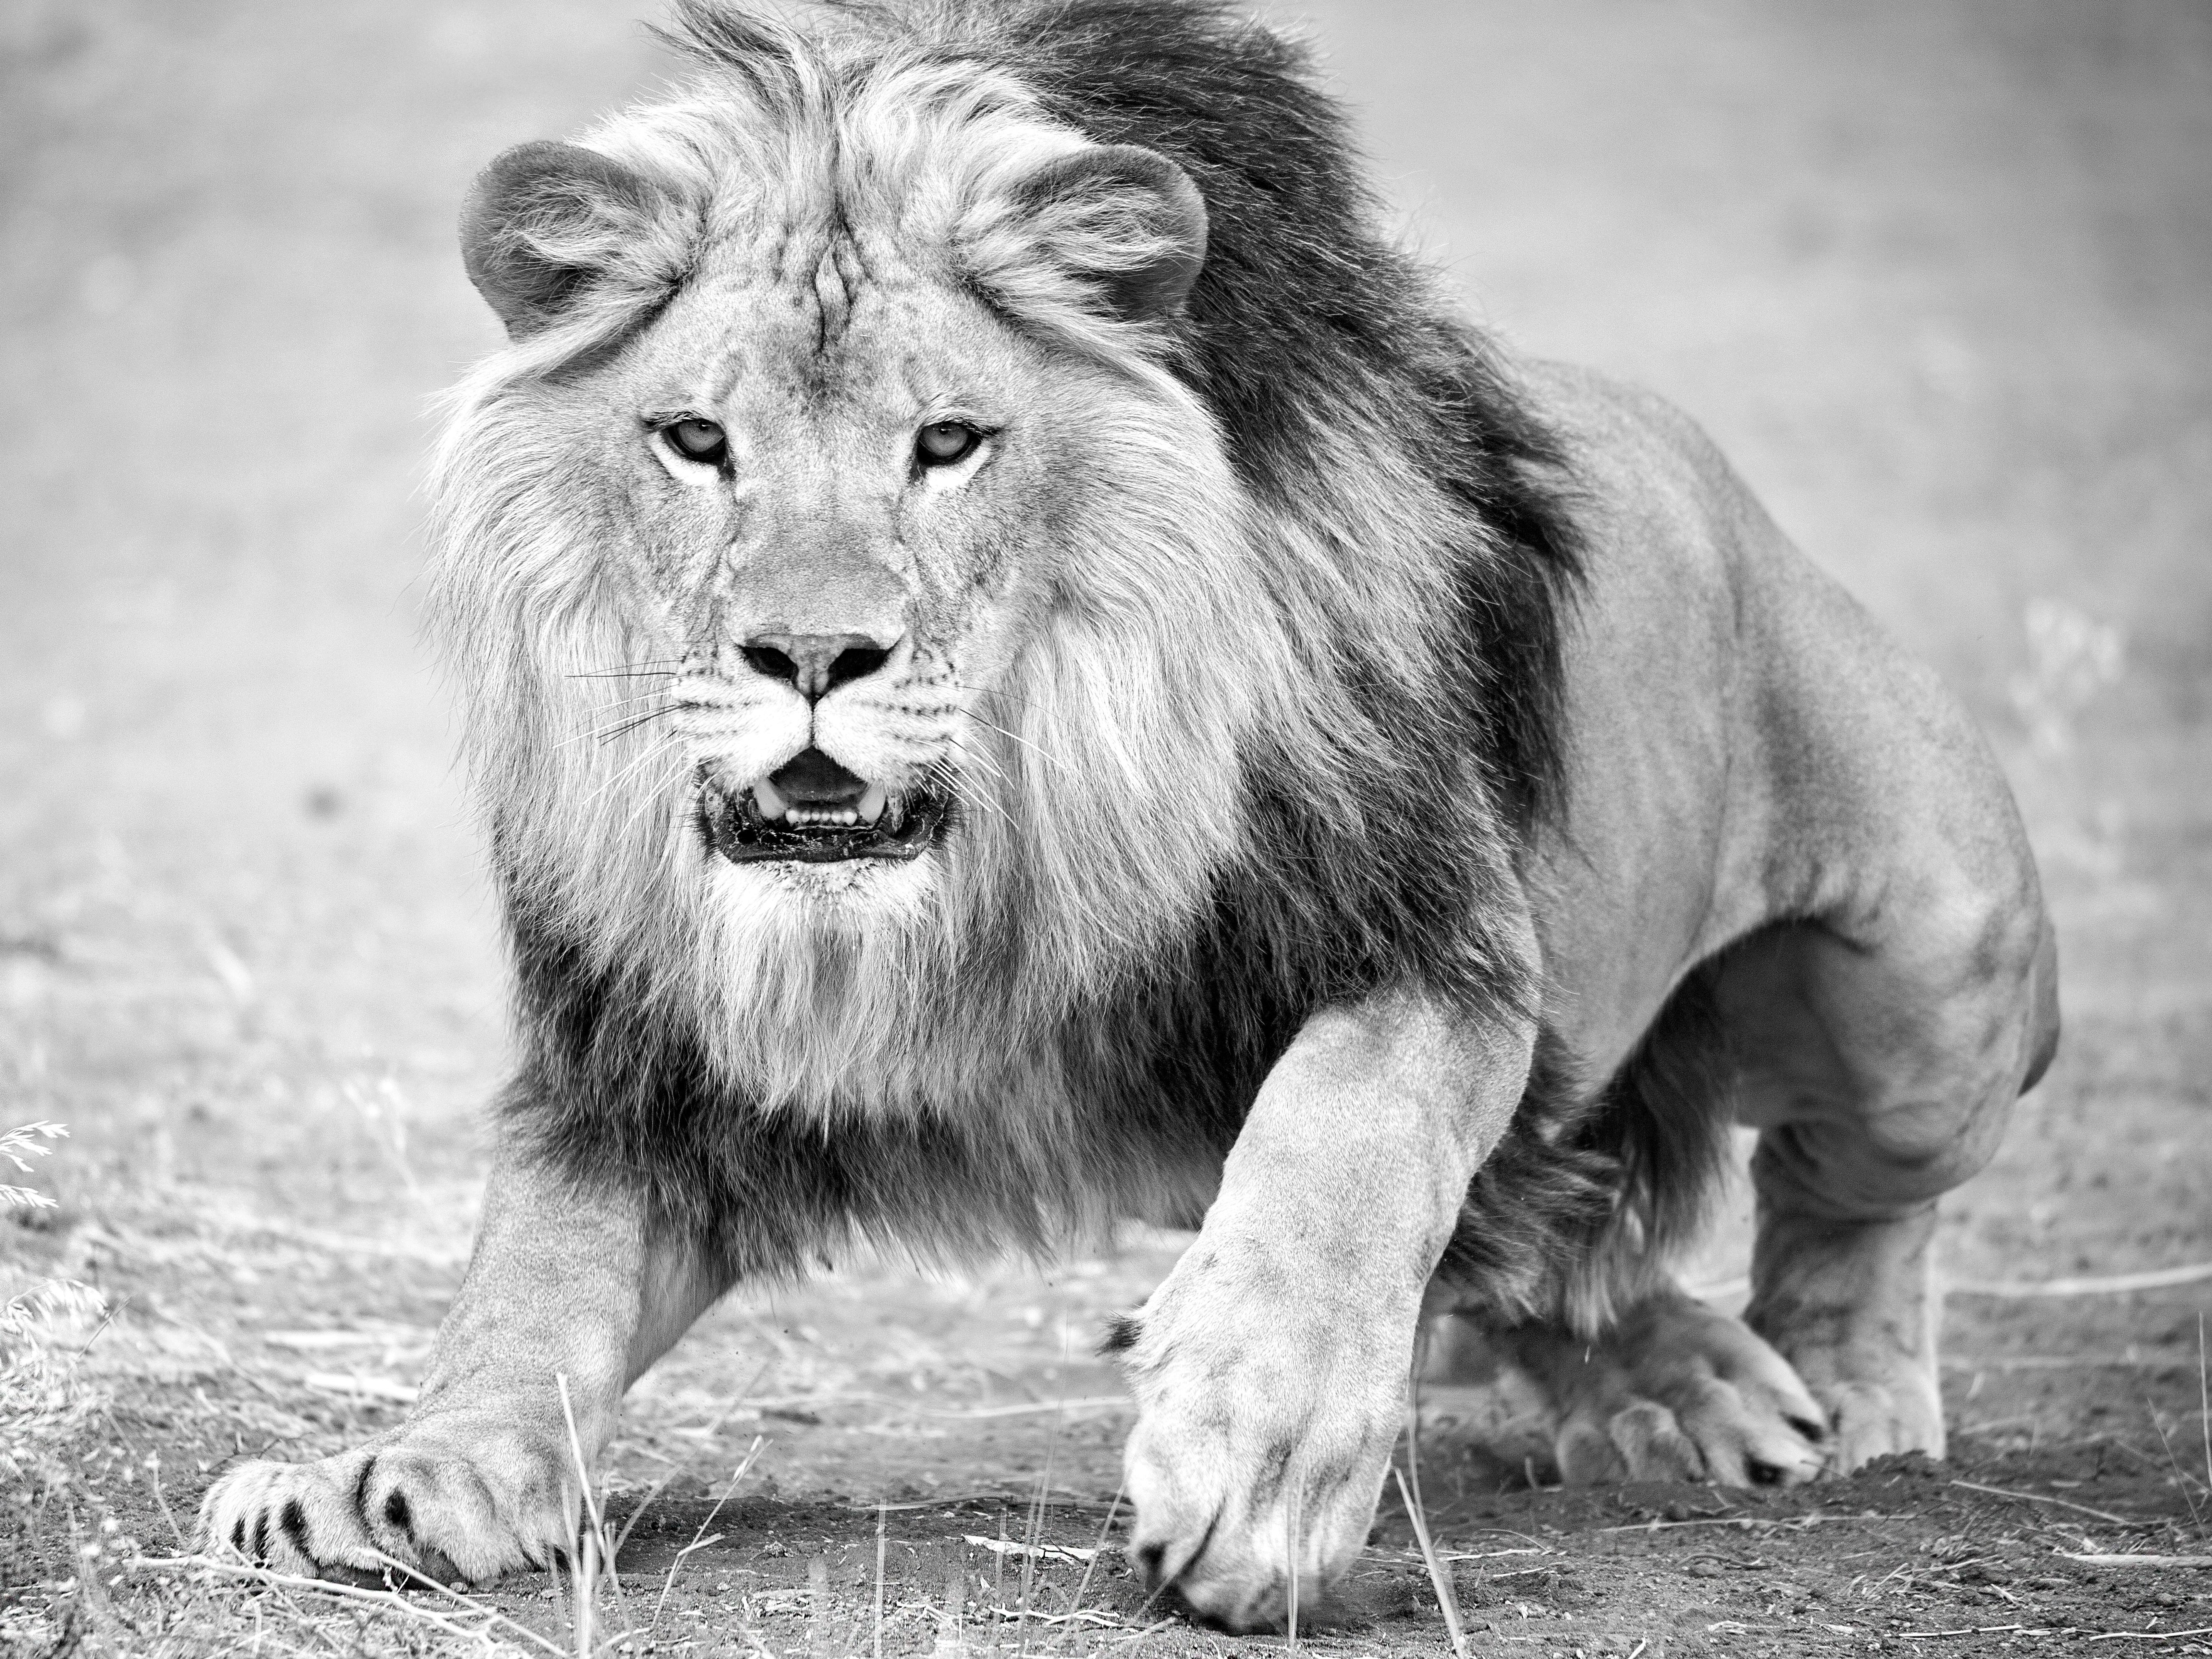 Shane Russeck Black and White Photograph - "The Charge" 50x60 - Black & White Photography, Lion Photograph, Unsigned Print